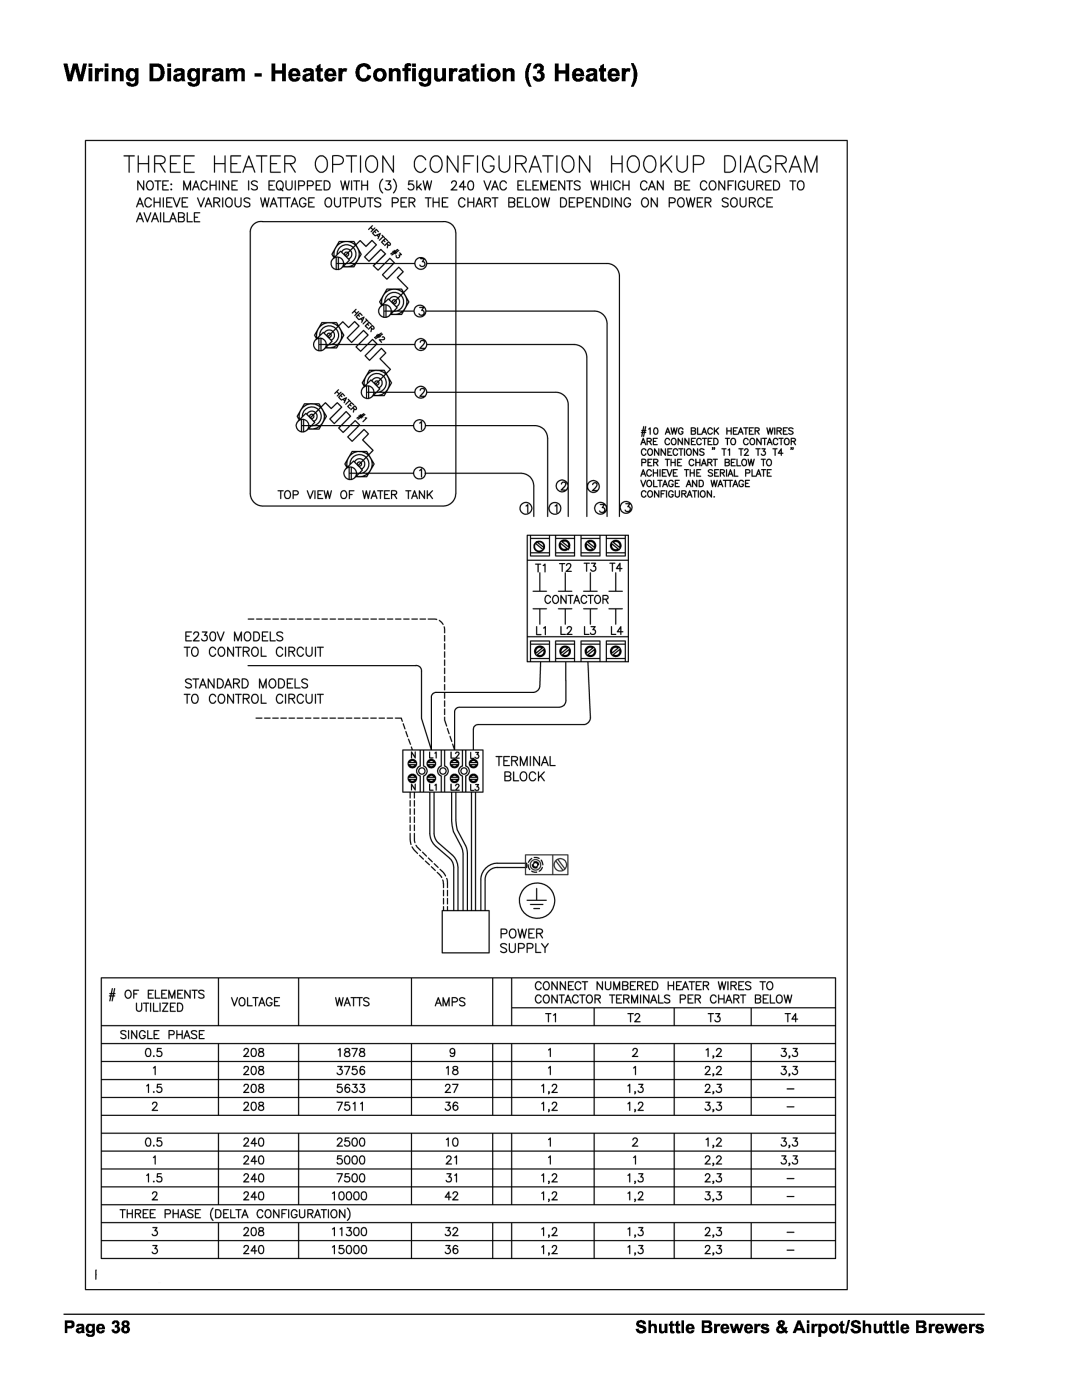 Grindmaster AM-344-04 Wiring Diagram - Heater Configuration 3 Heater, Page, Shuttle Brewers & Airpot/Shuttle Brewers 